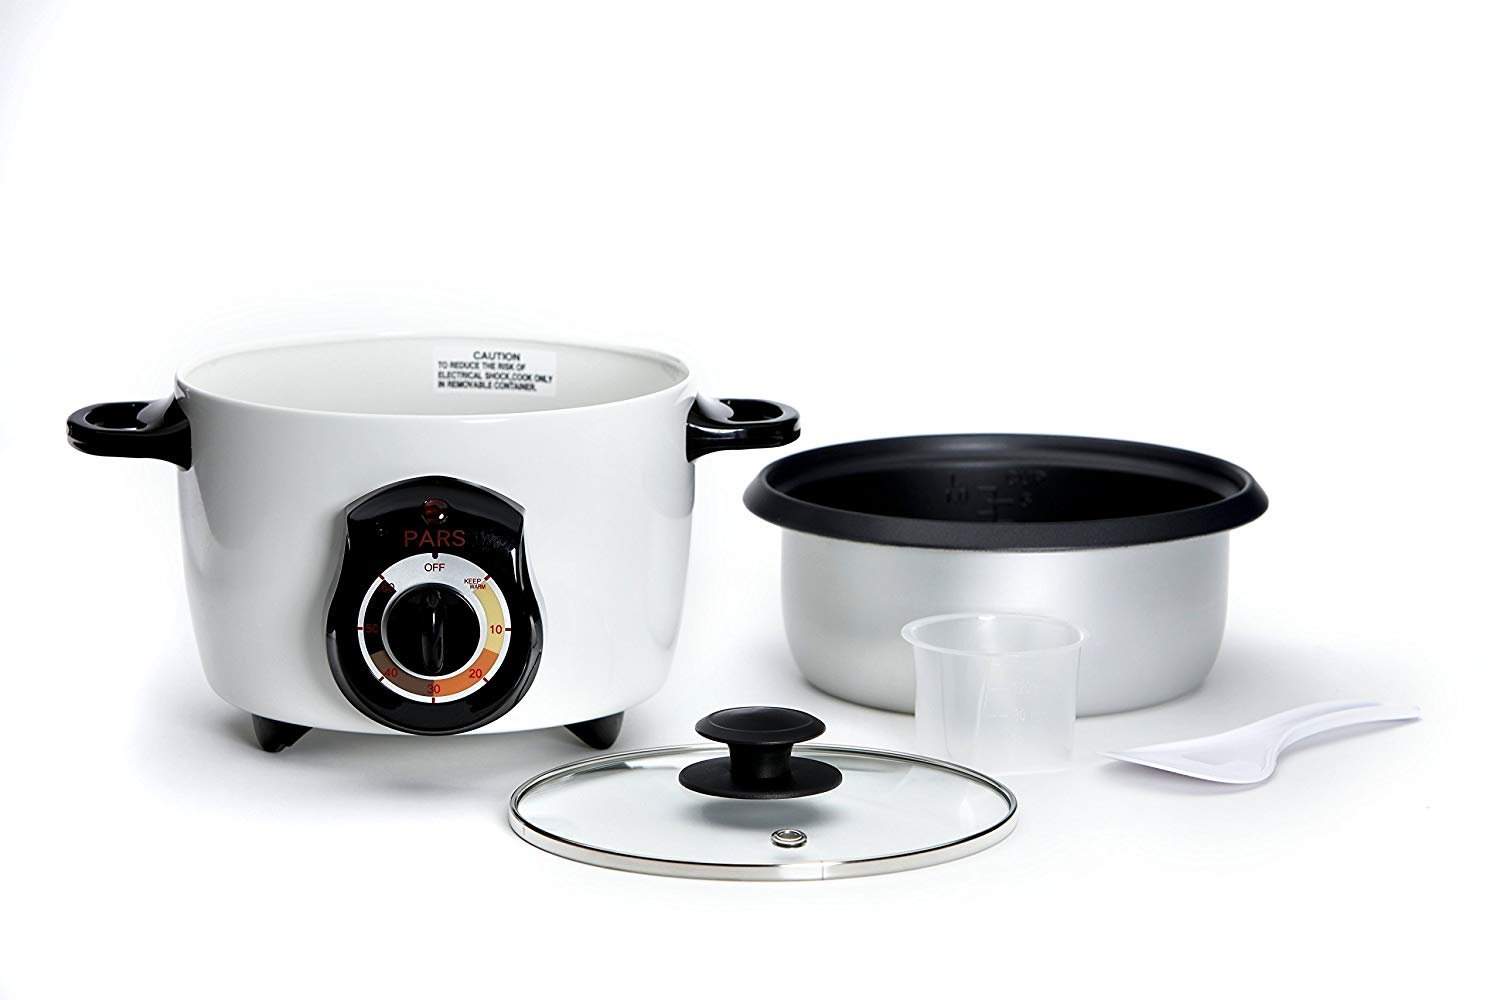 Pars 5-Cup Persian Rice Cooker